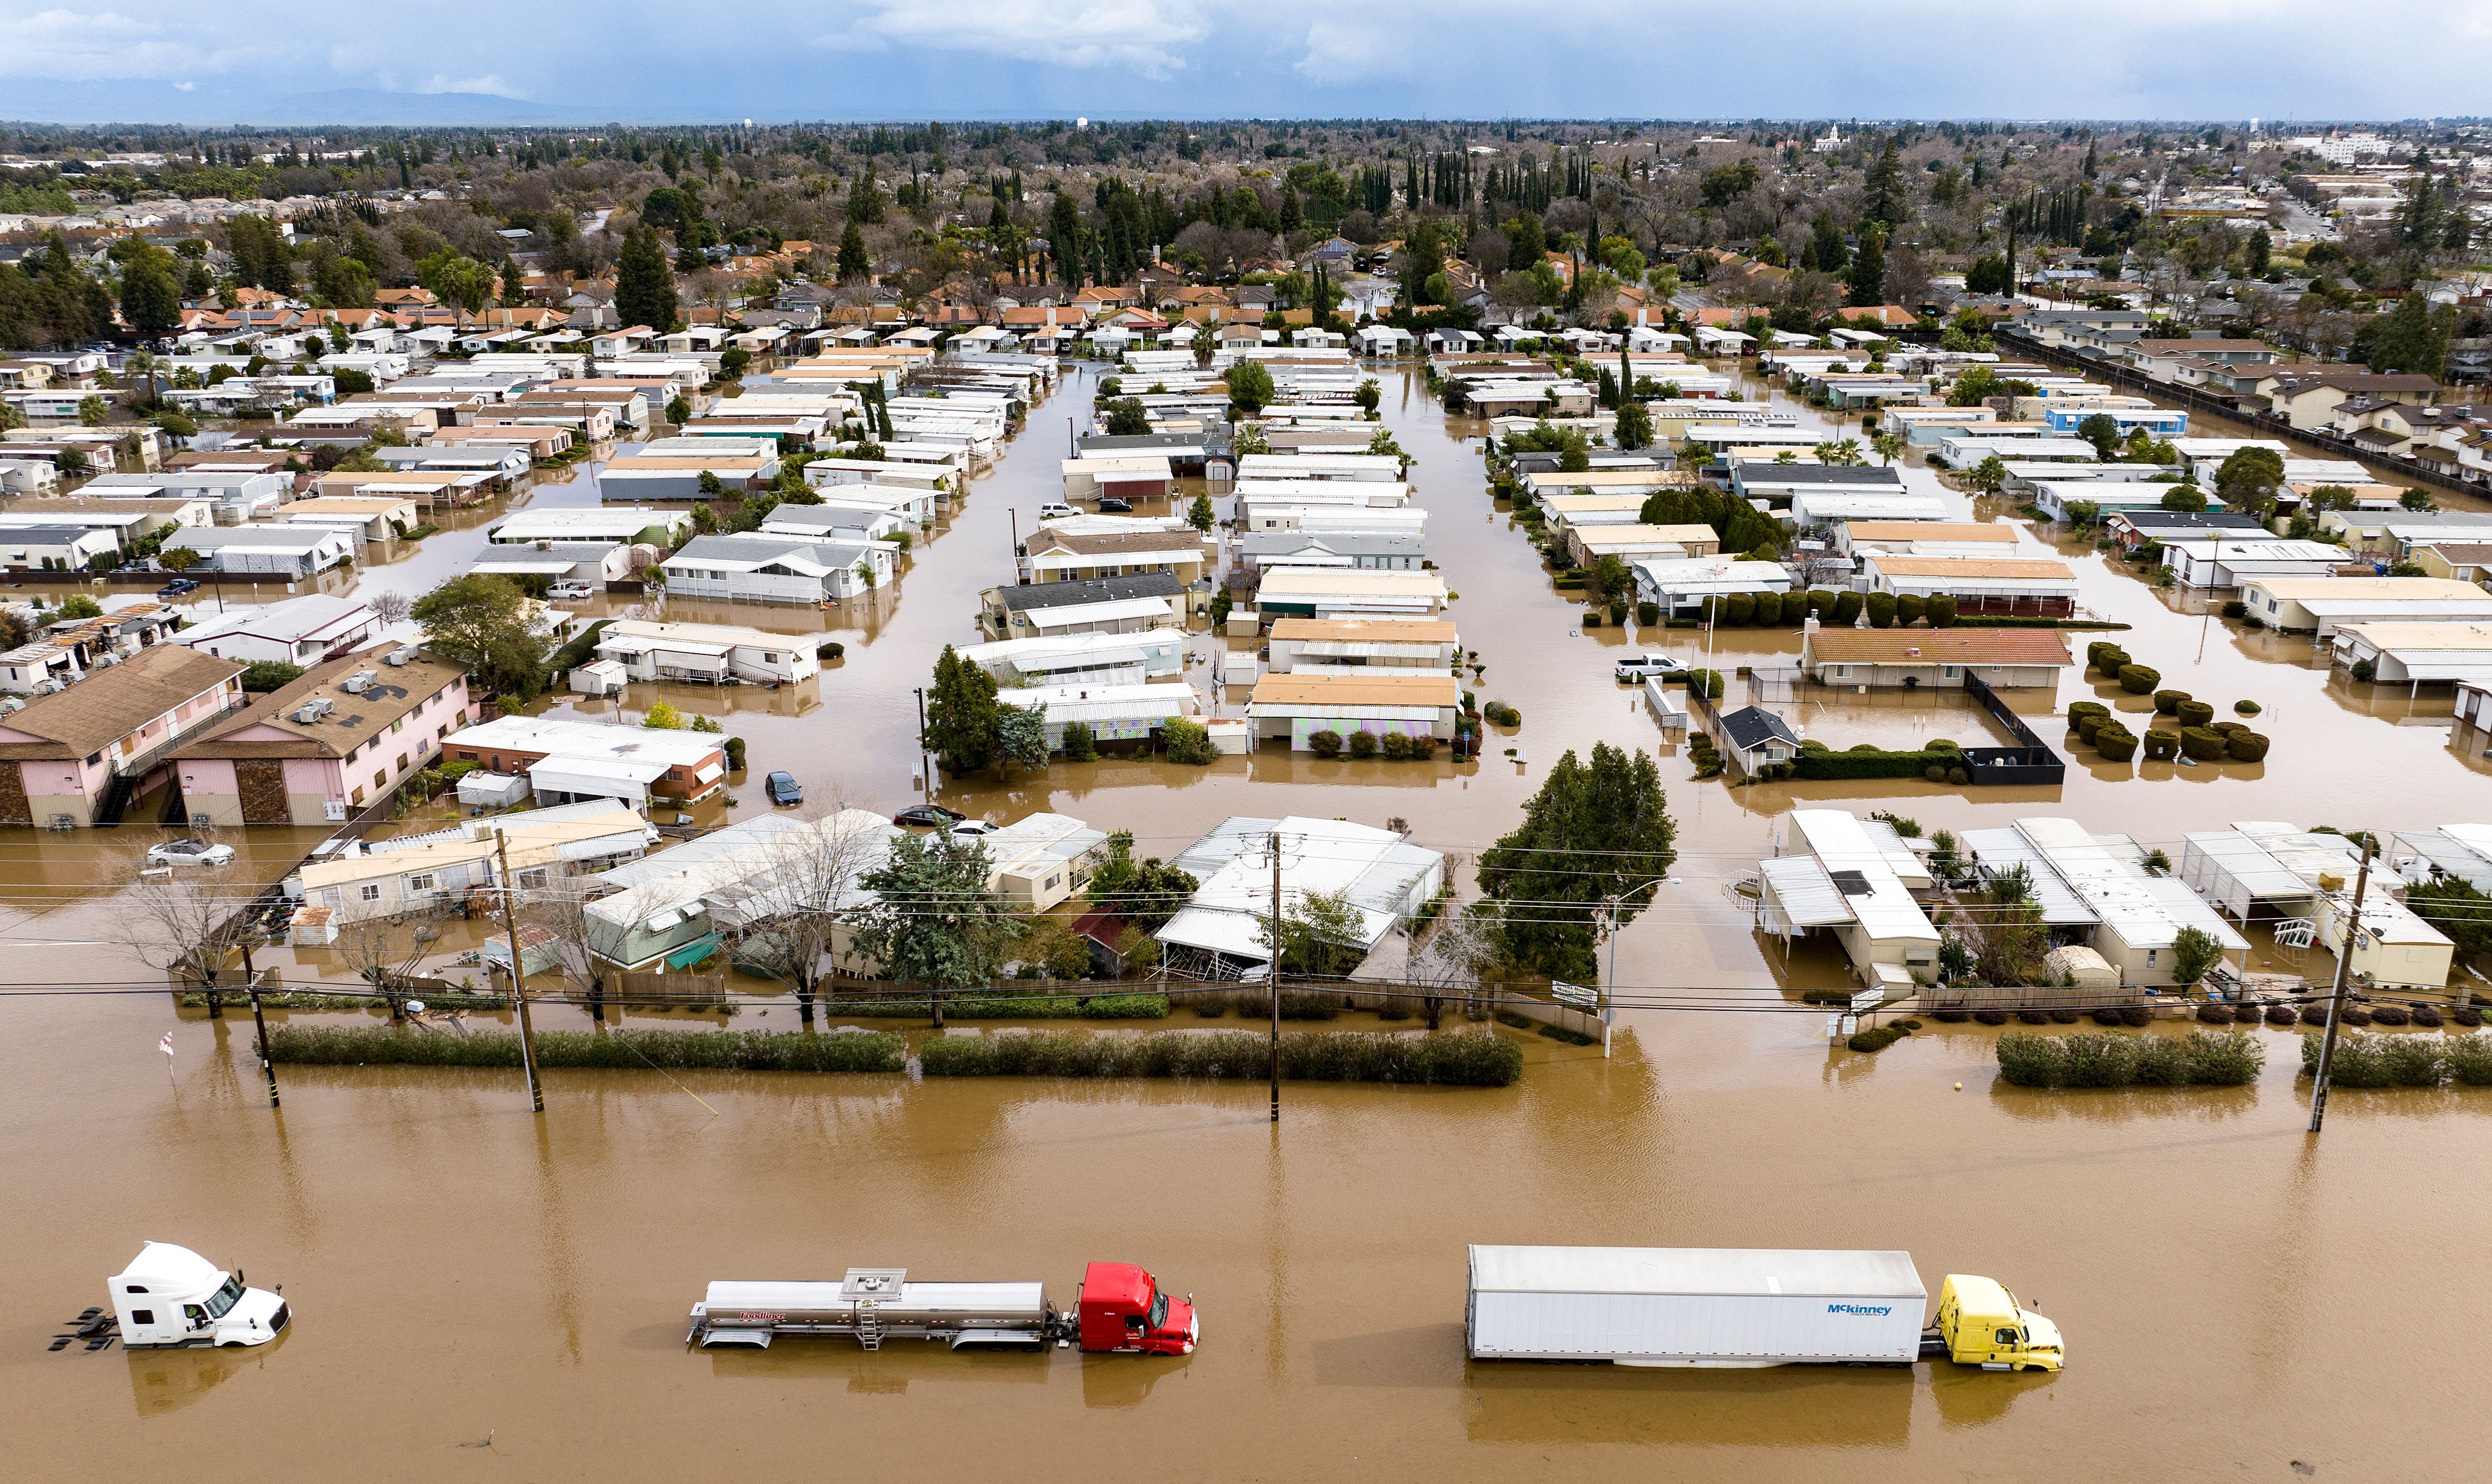  This aerial view shows a flooded neighborhood in Merced, California on January 10, 2023.